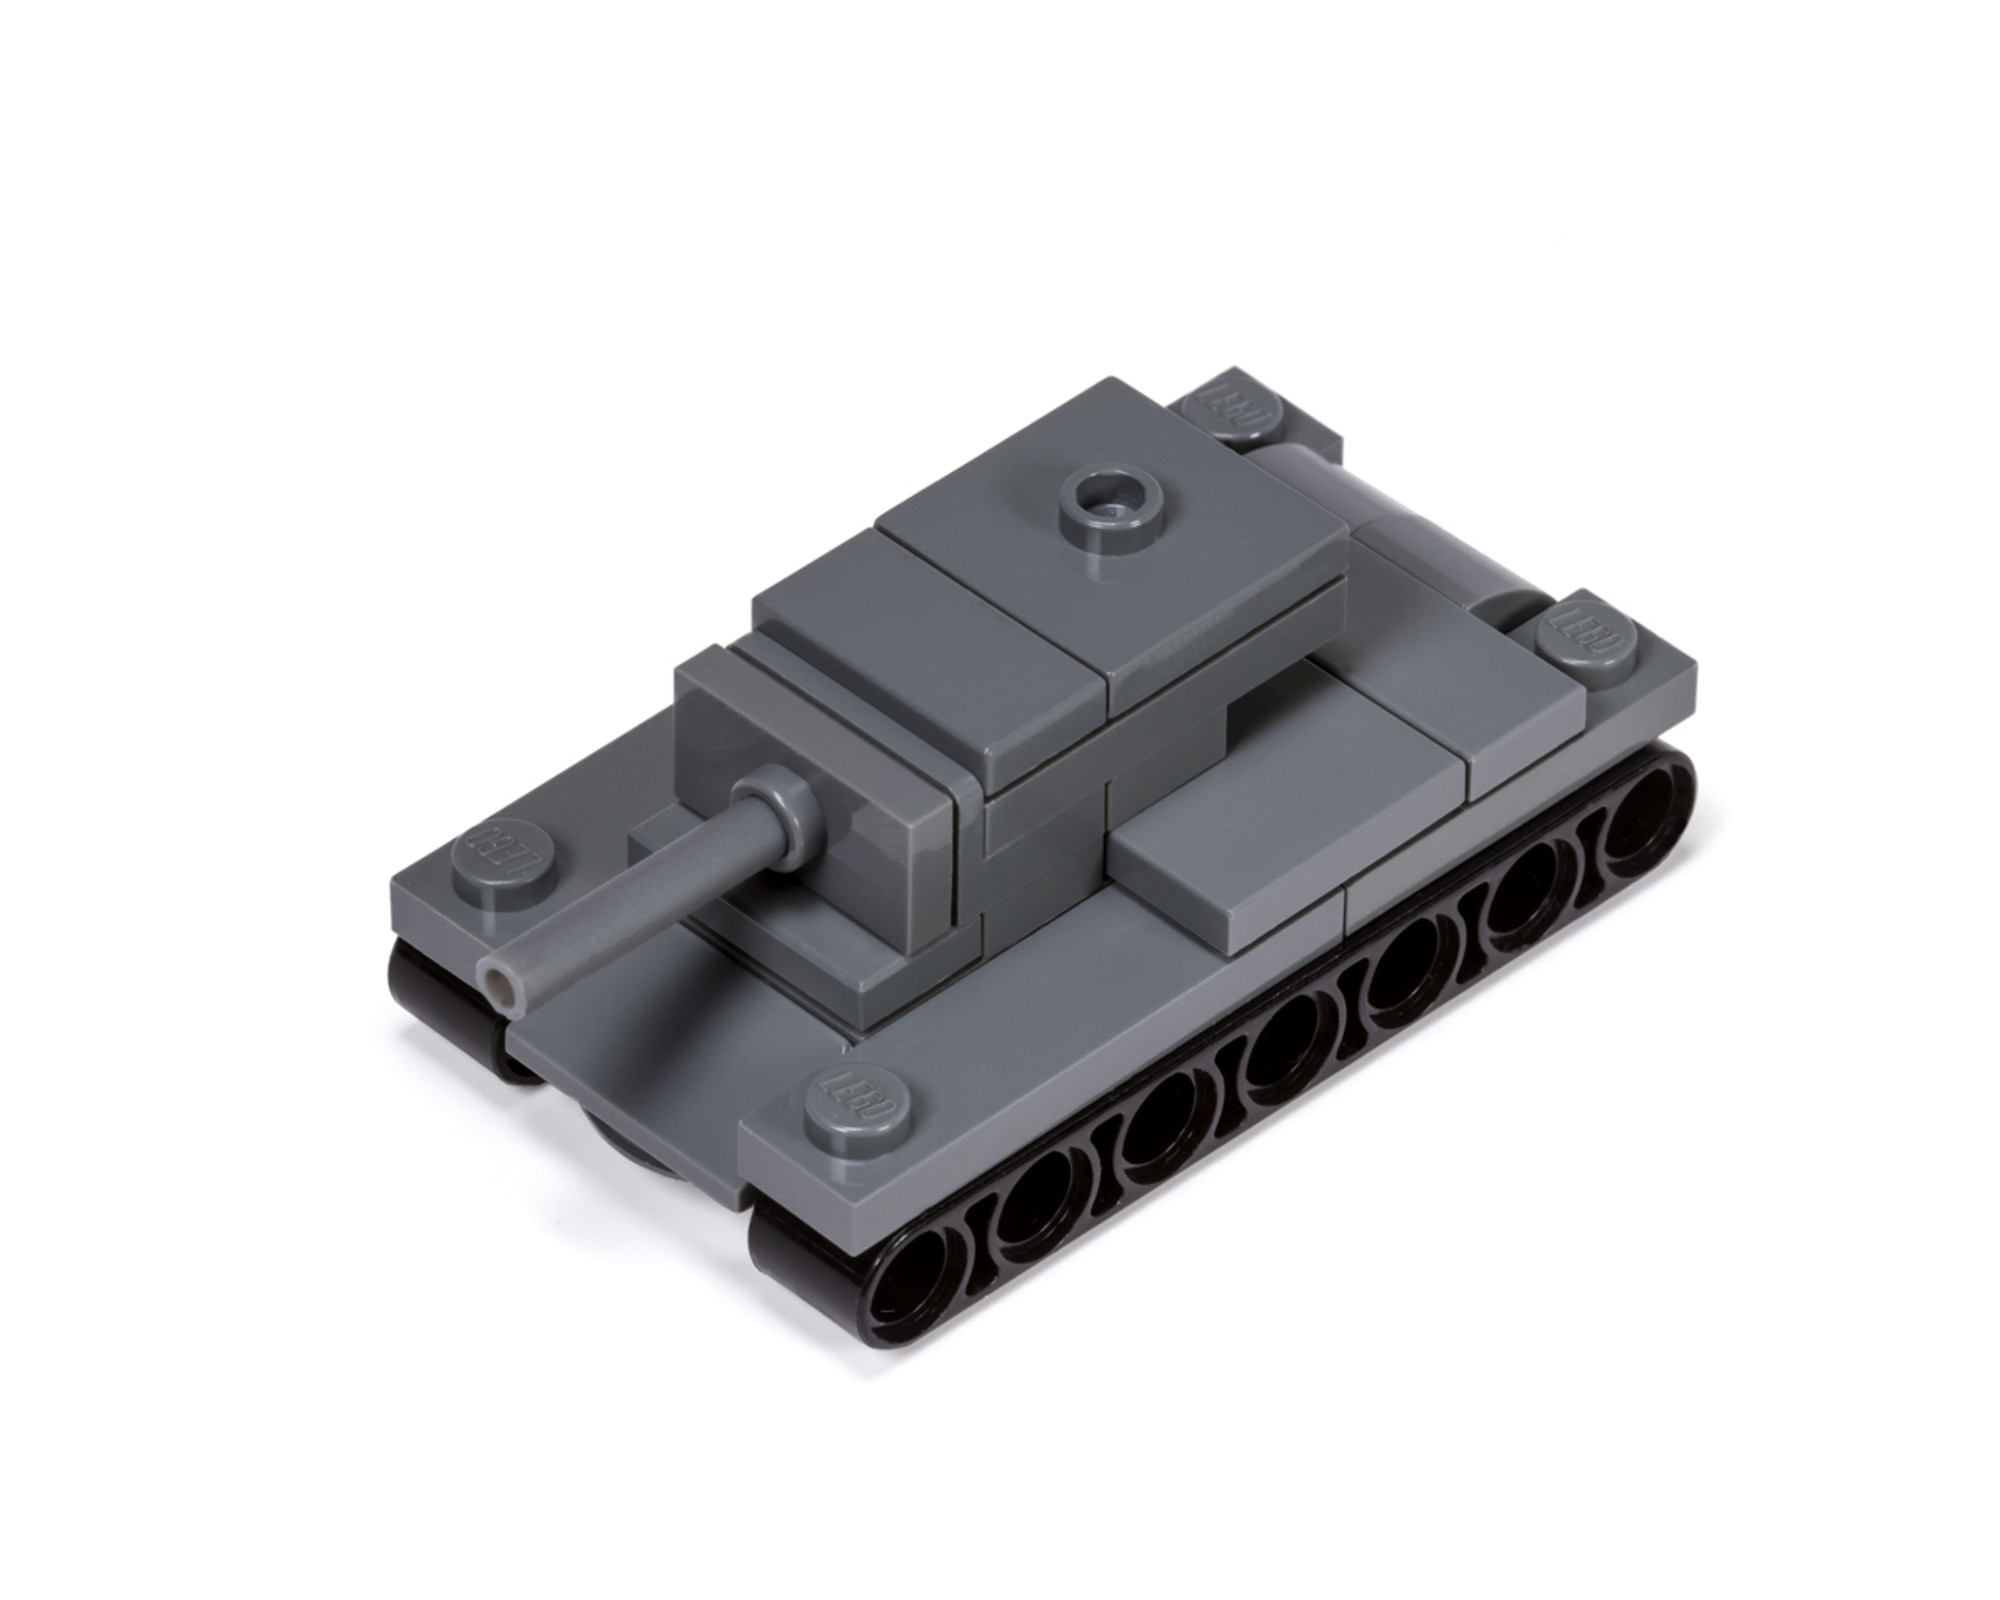 Brickmania - Add our official KV-1 Micro-tank to your arsenal for